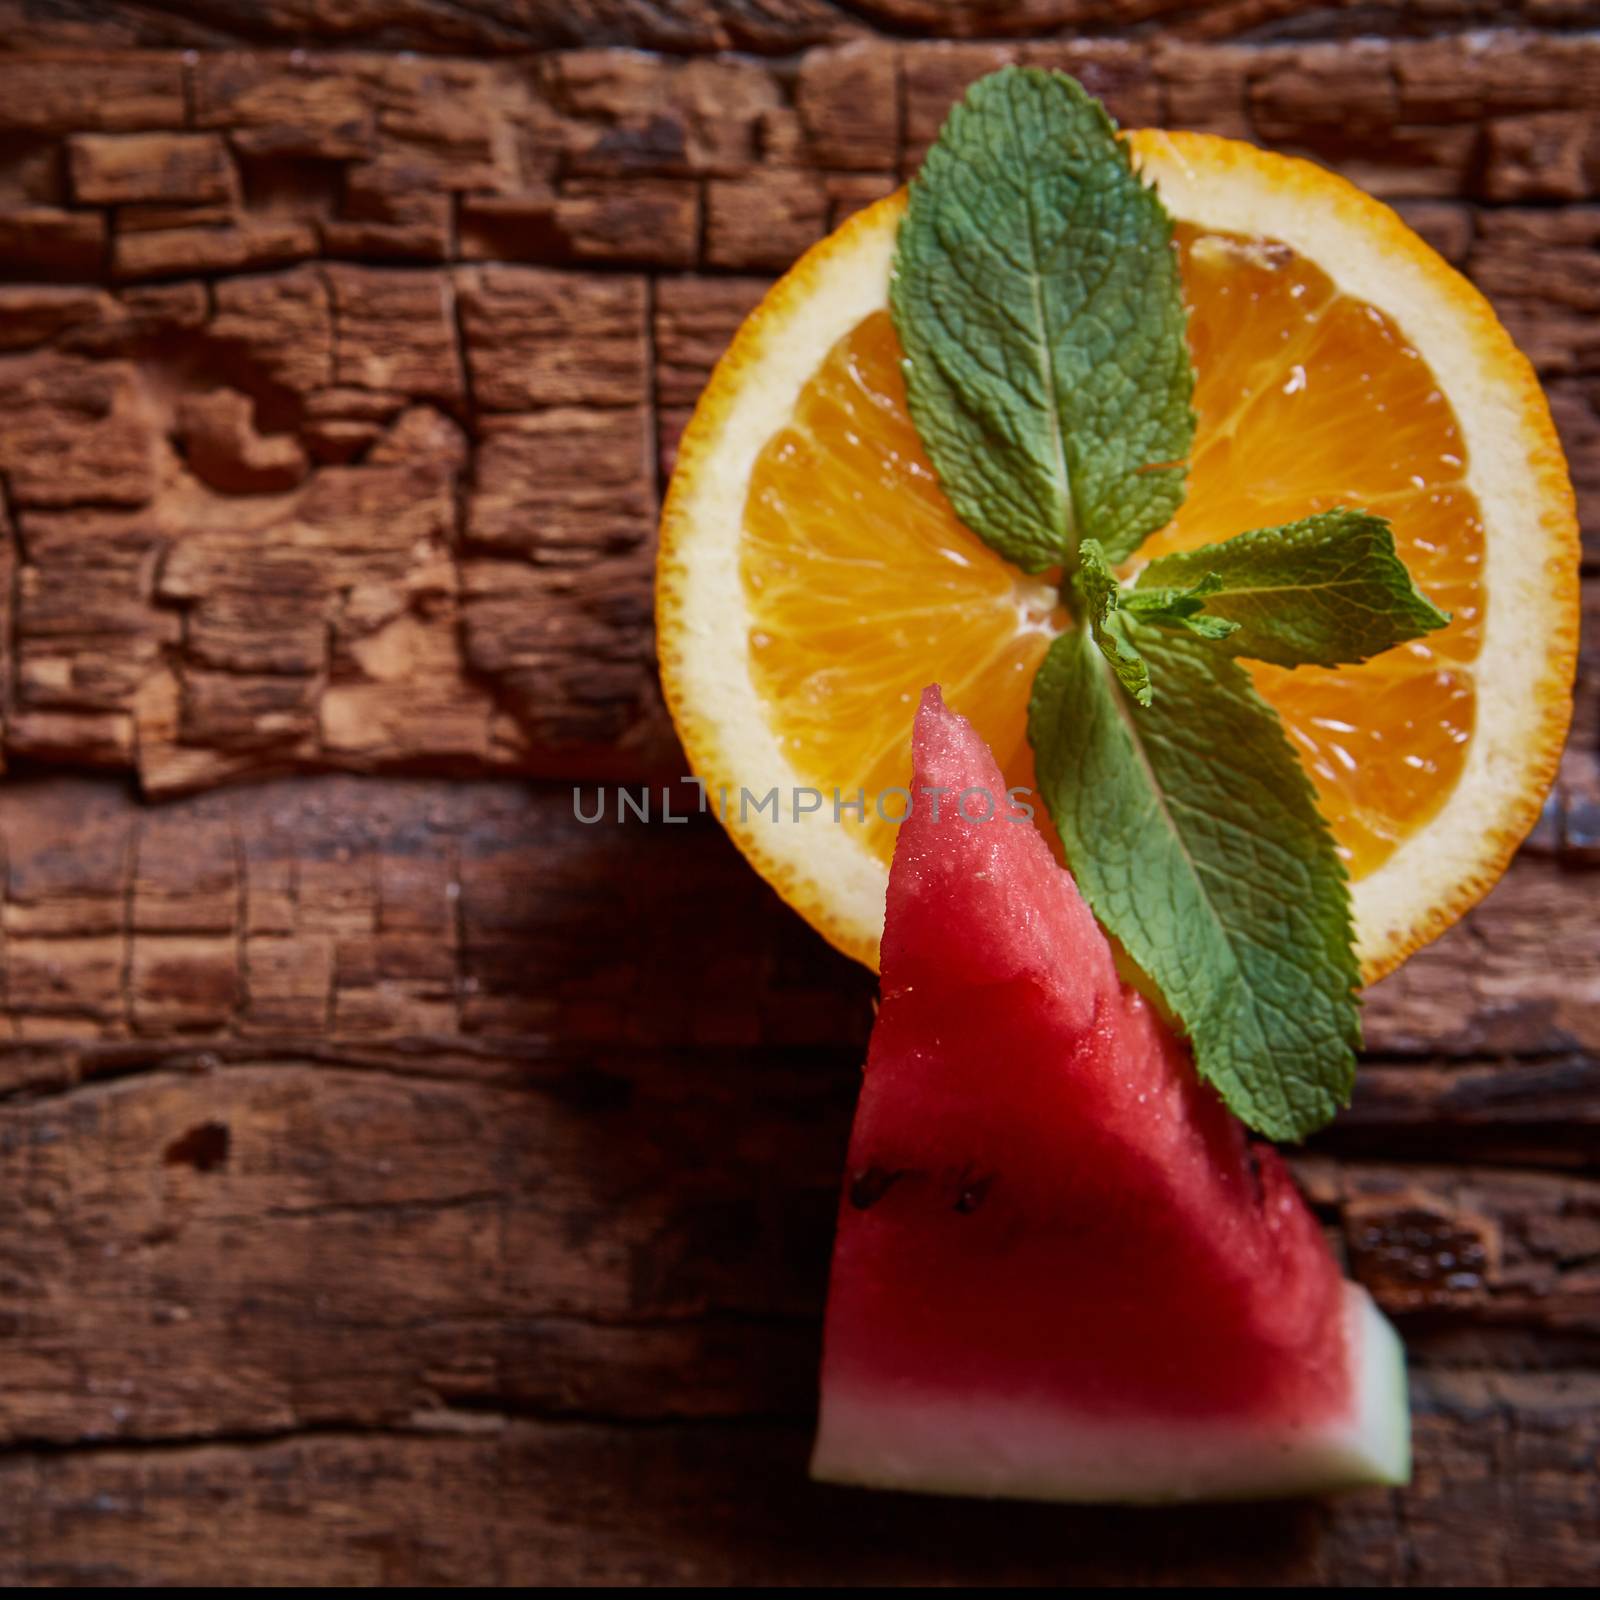 Watermelon, mint and orange with copy space on the wooden background